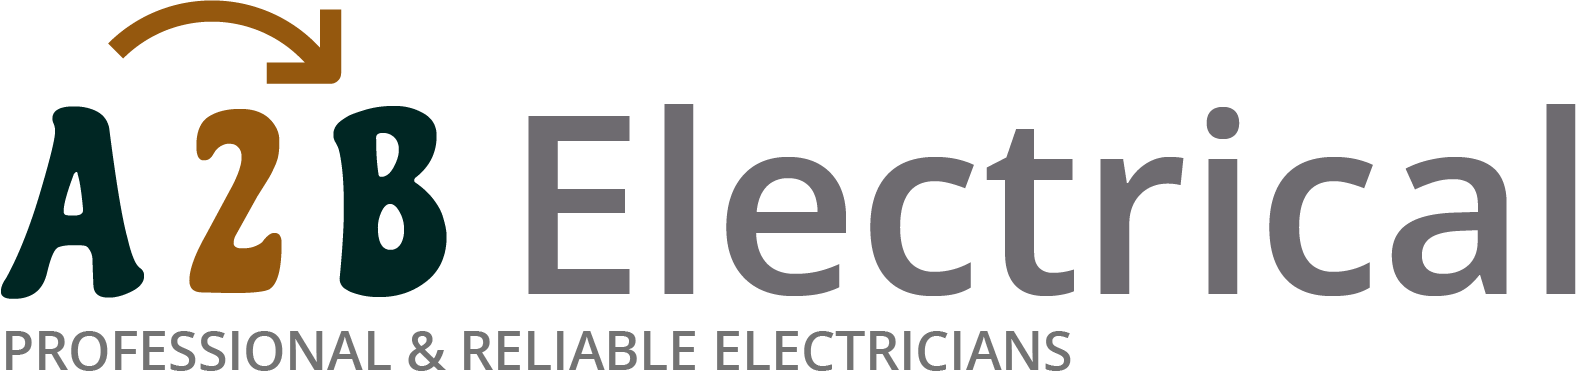 If you have electrical wiring problems in Hurstpierpoint, we can provide an electrician to have a look for you. 